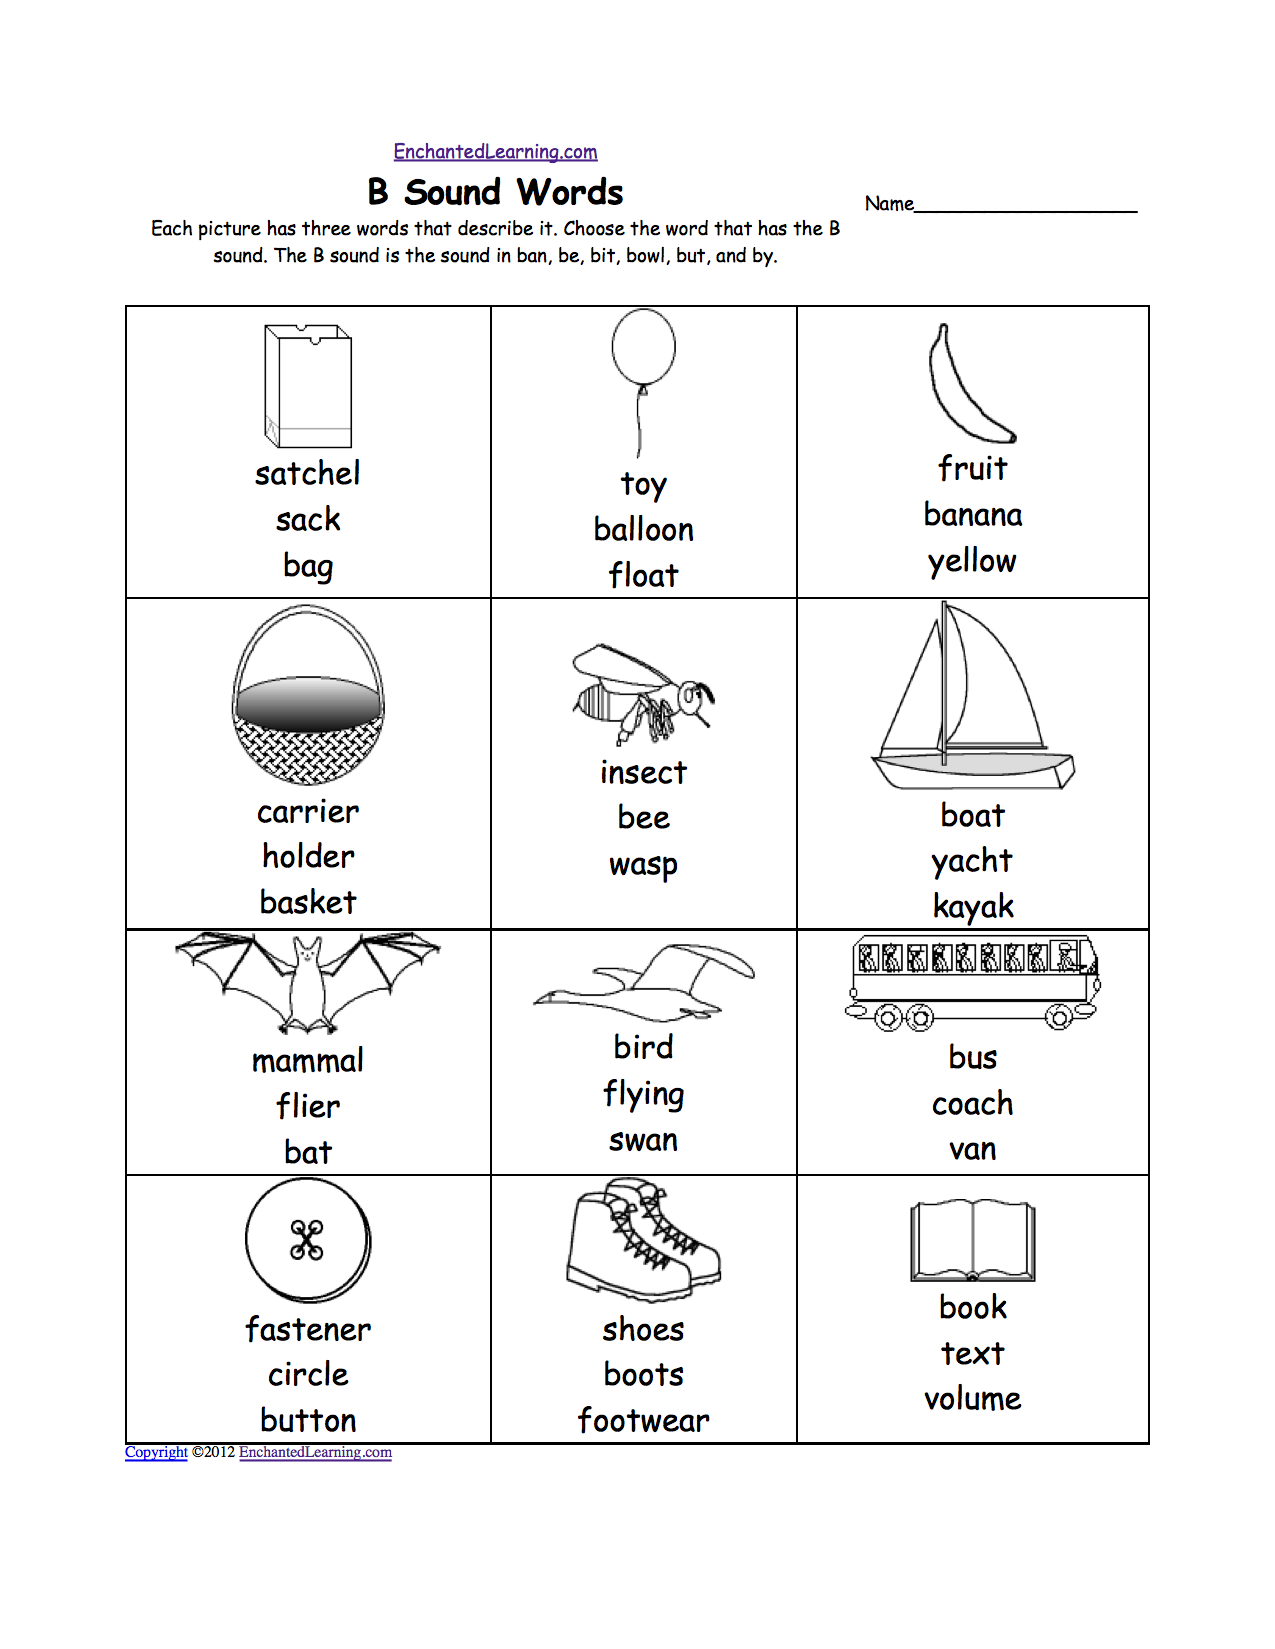 teach-child-how-to-read-air-sound-phonics-worksheet